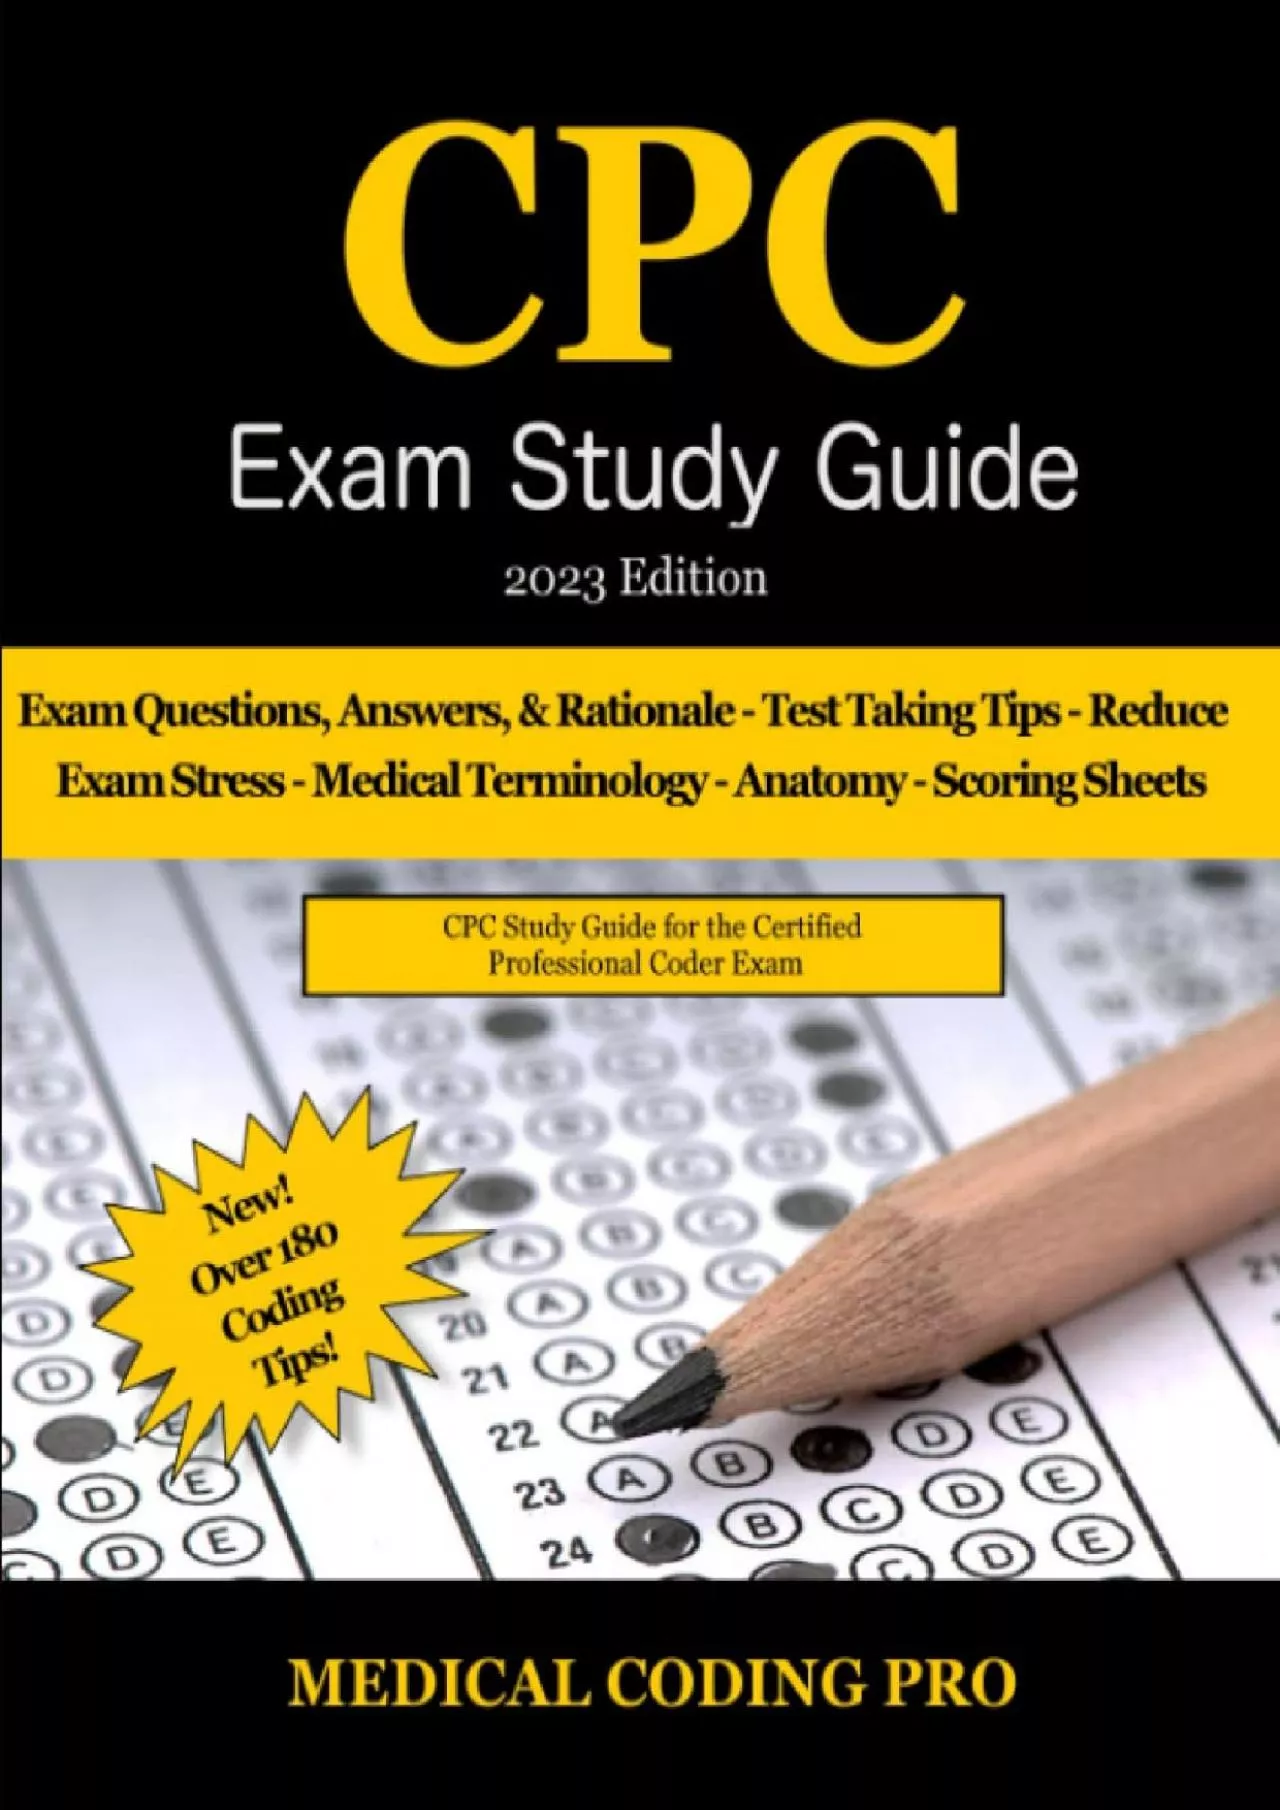 [READ] CPC Exam Study Guide - 2023 Edition: 300 CPC Practice Exam Questions, Answers,